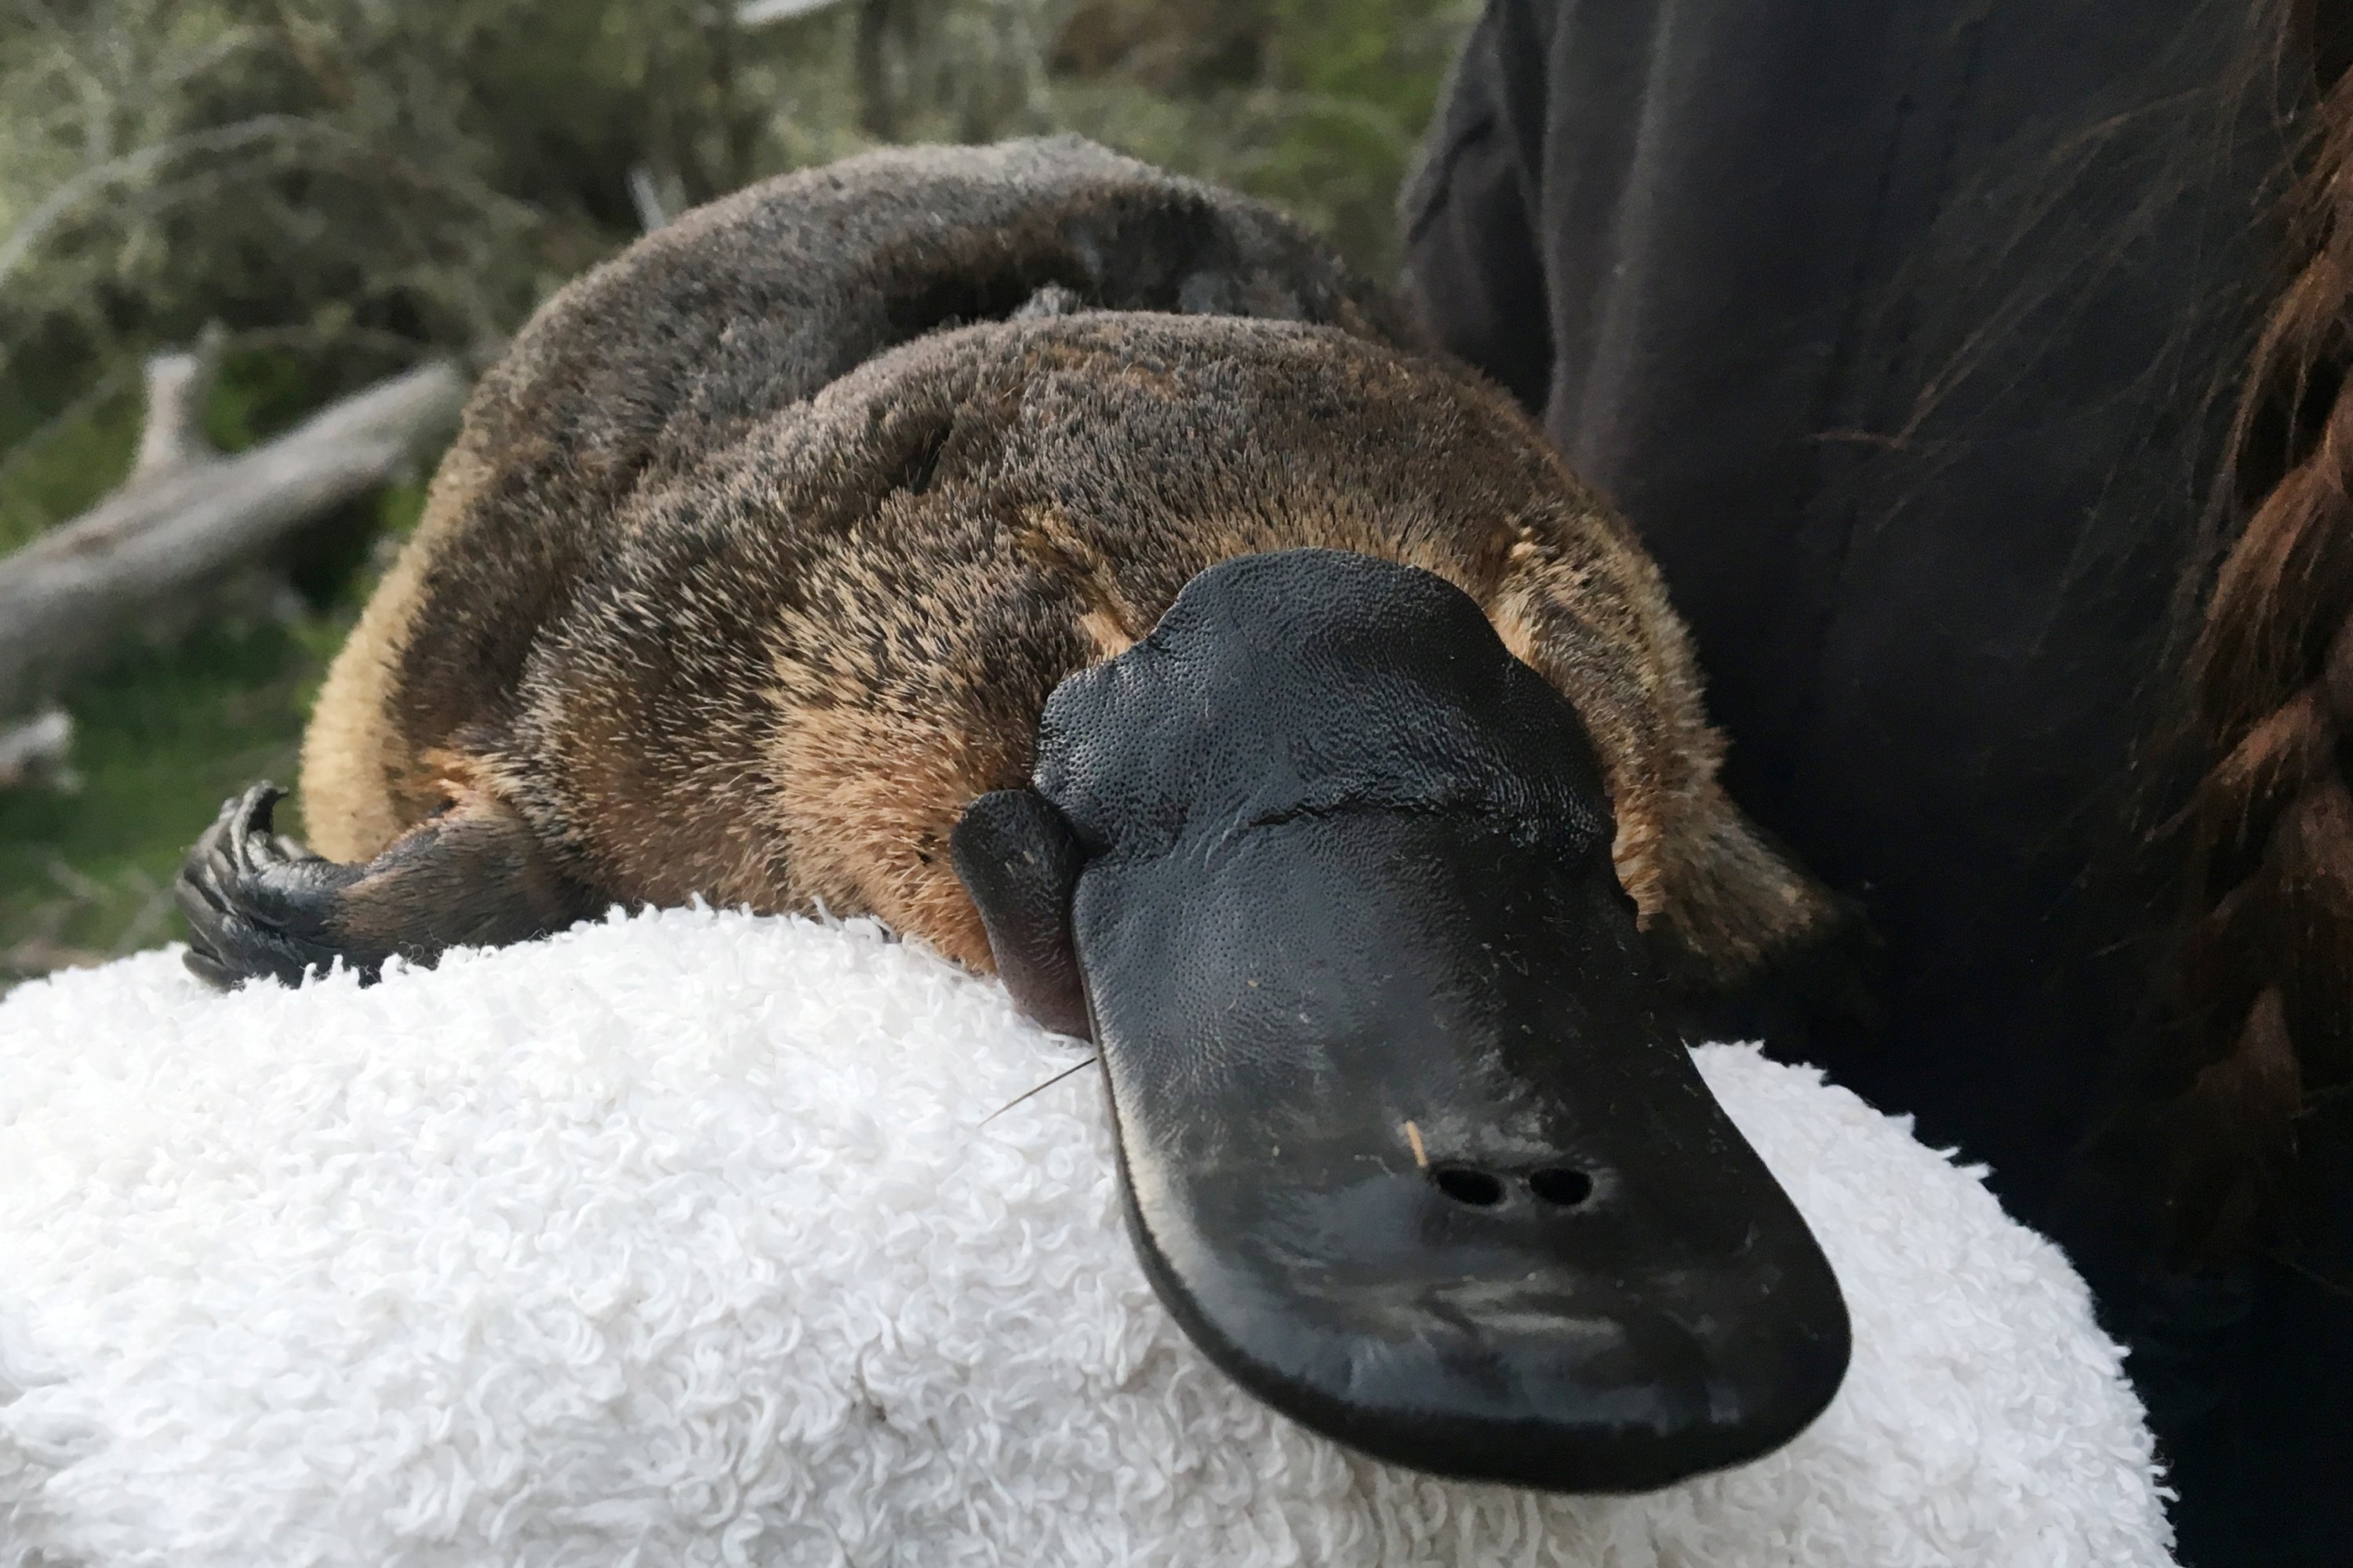 Platypus in peril: Australian egg-laying mammals' habitat shrunk by 22% in  30 years | Daily Sabah